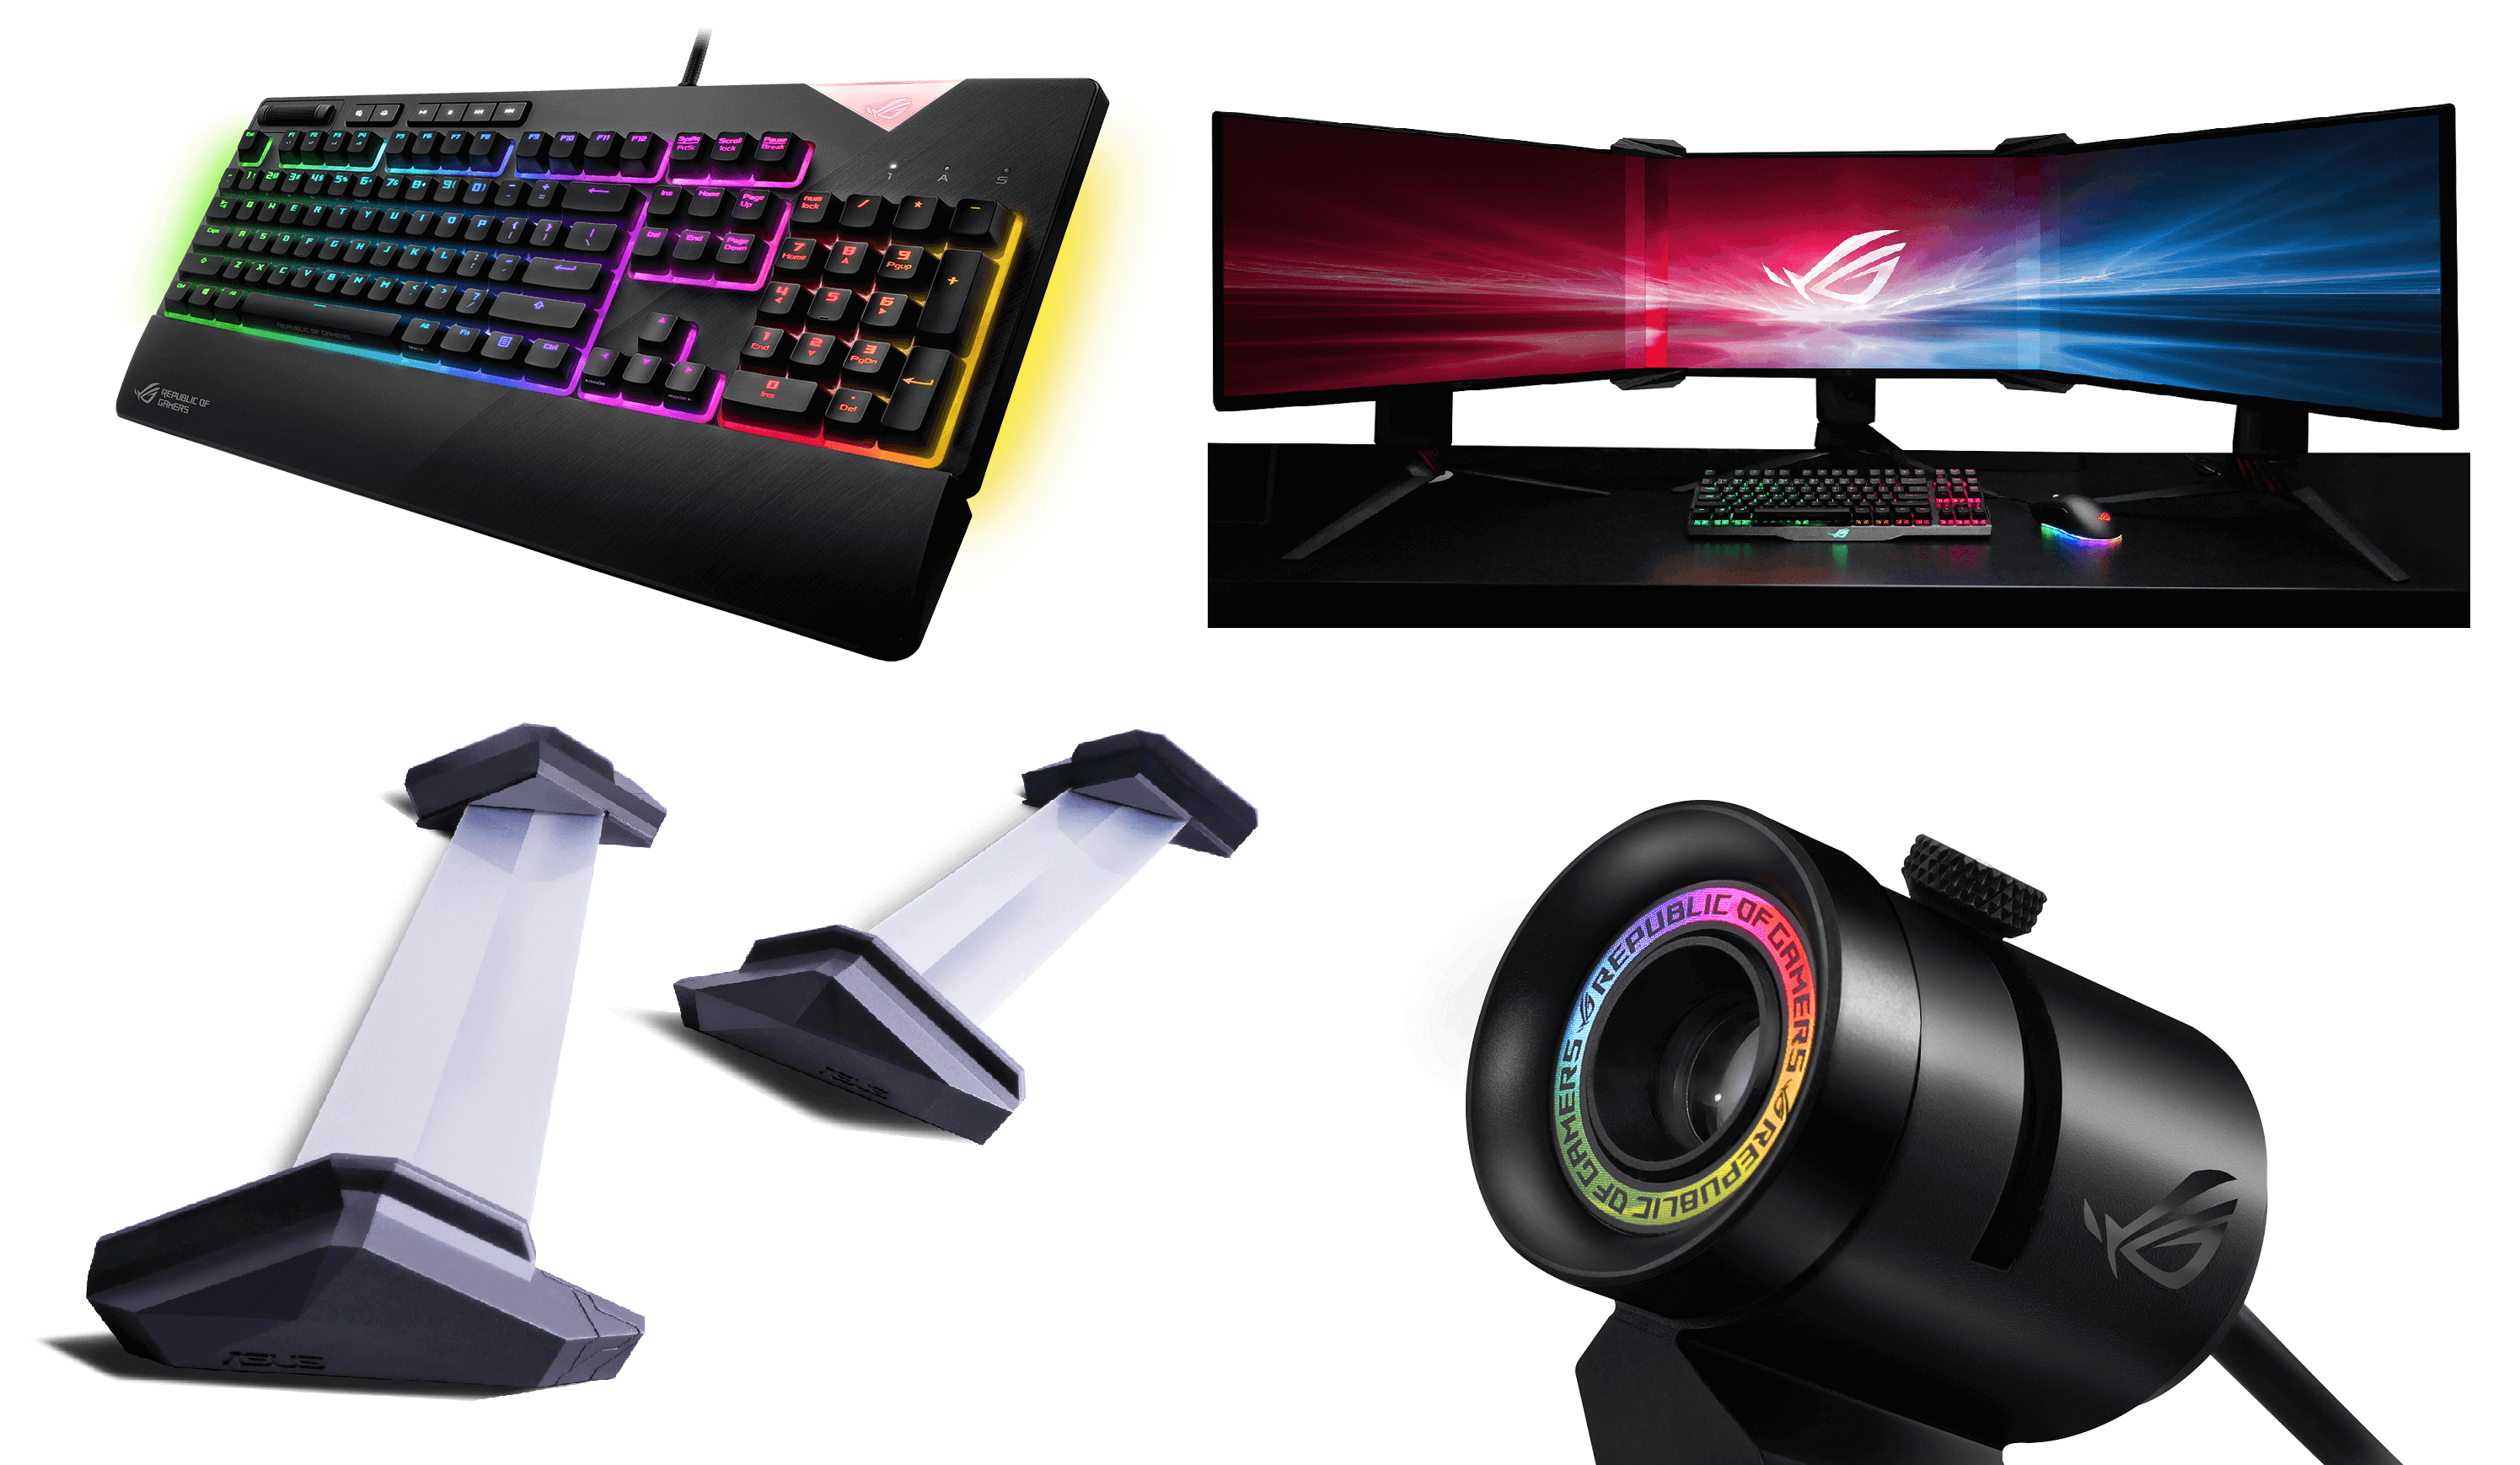 ASUS ROG Announces Latest Gaming Gear at CES 2018